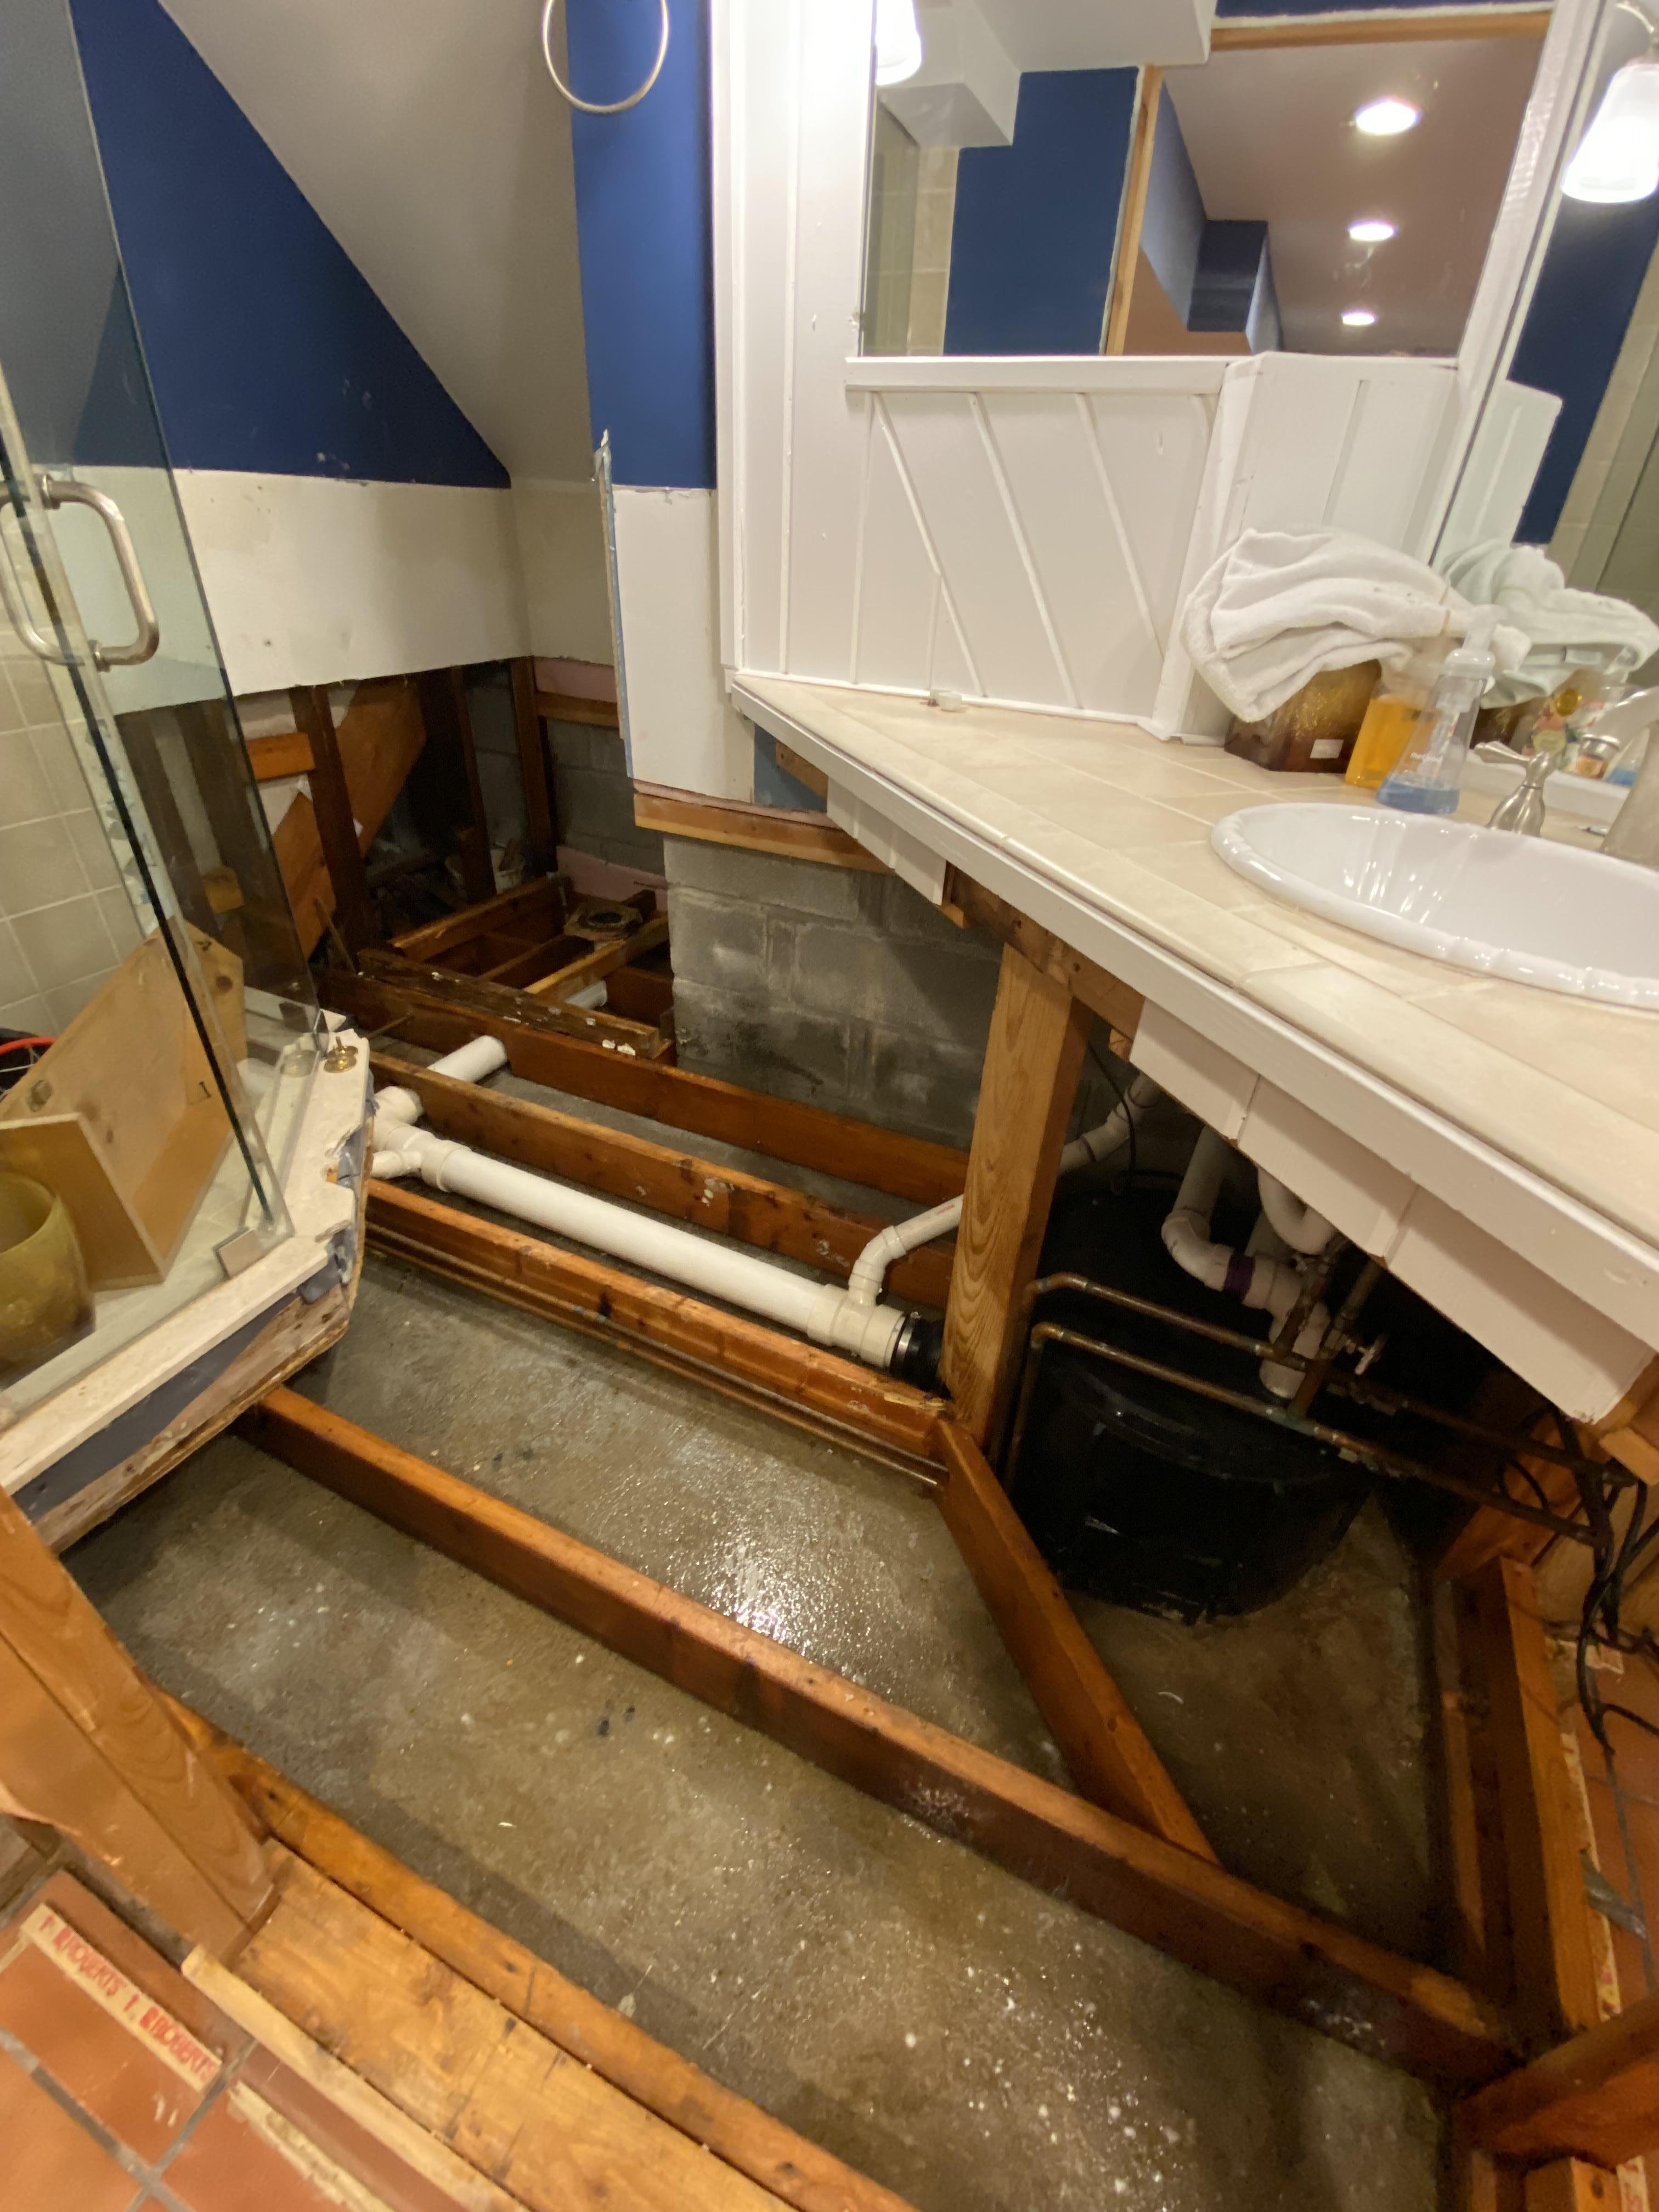 Removal of floor tile, vanity, toilet and lower walls